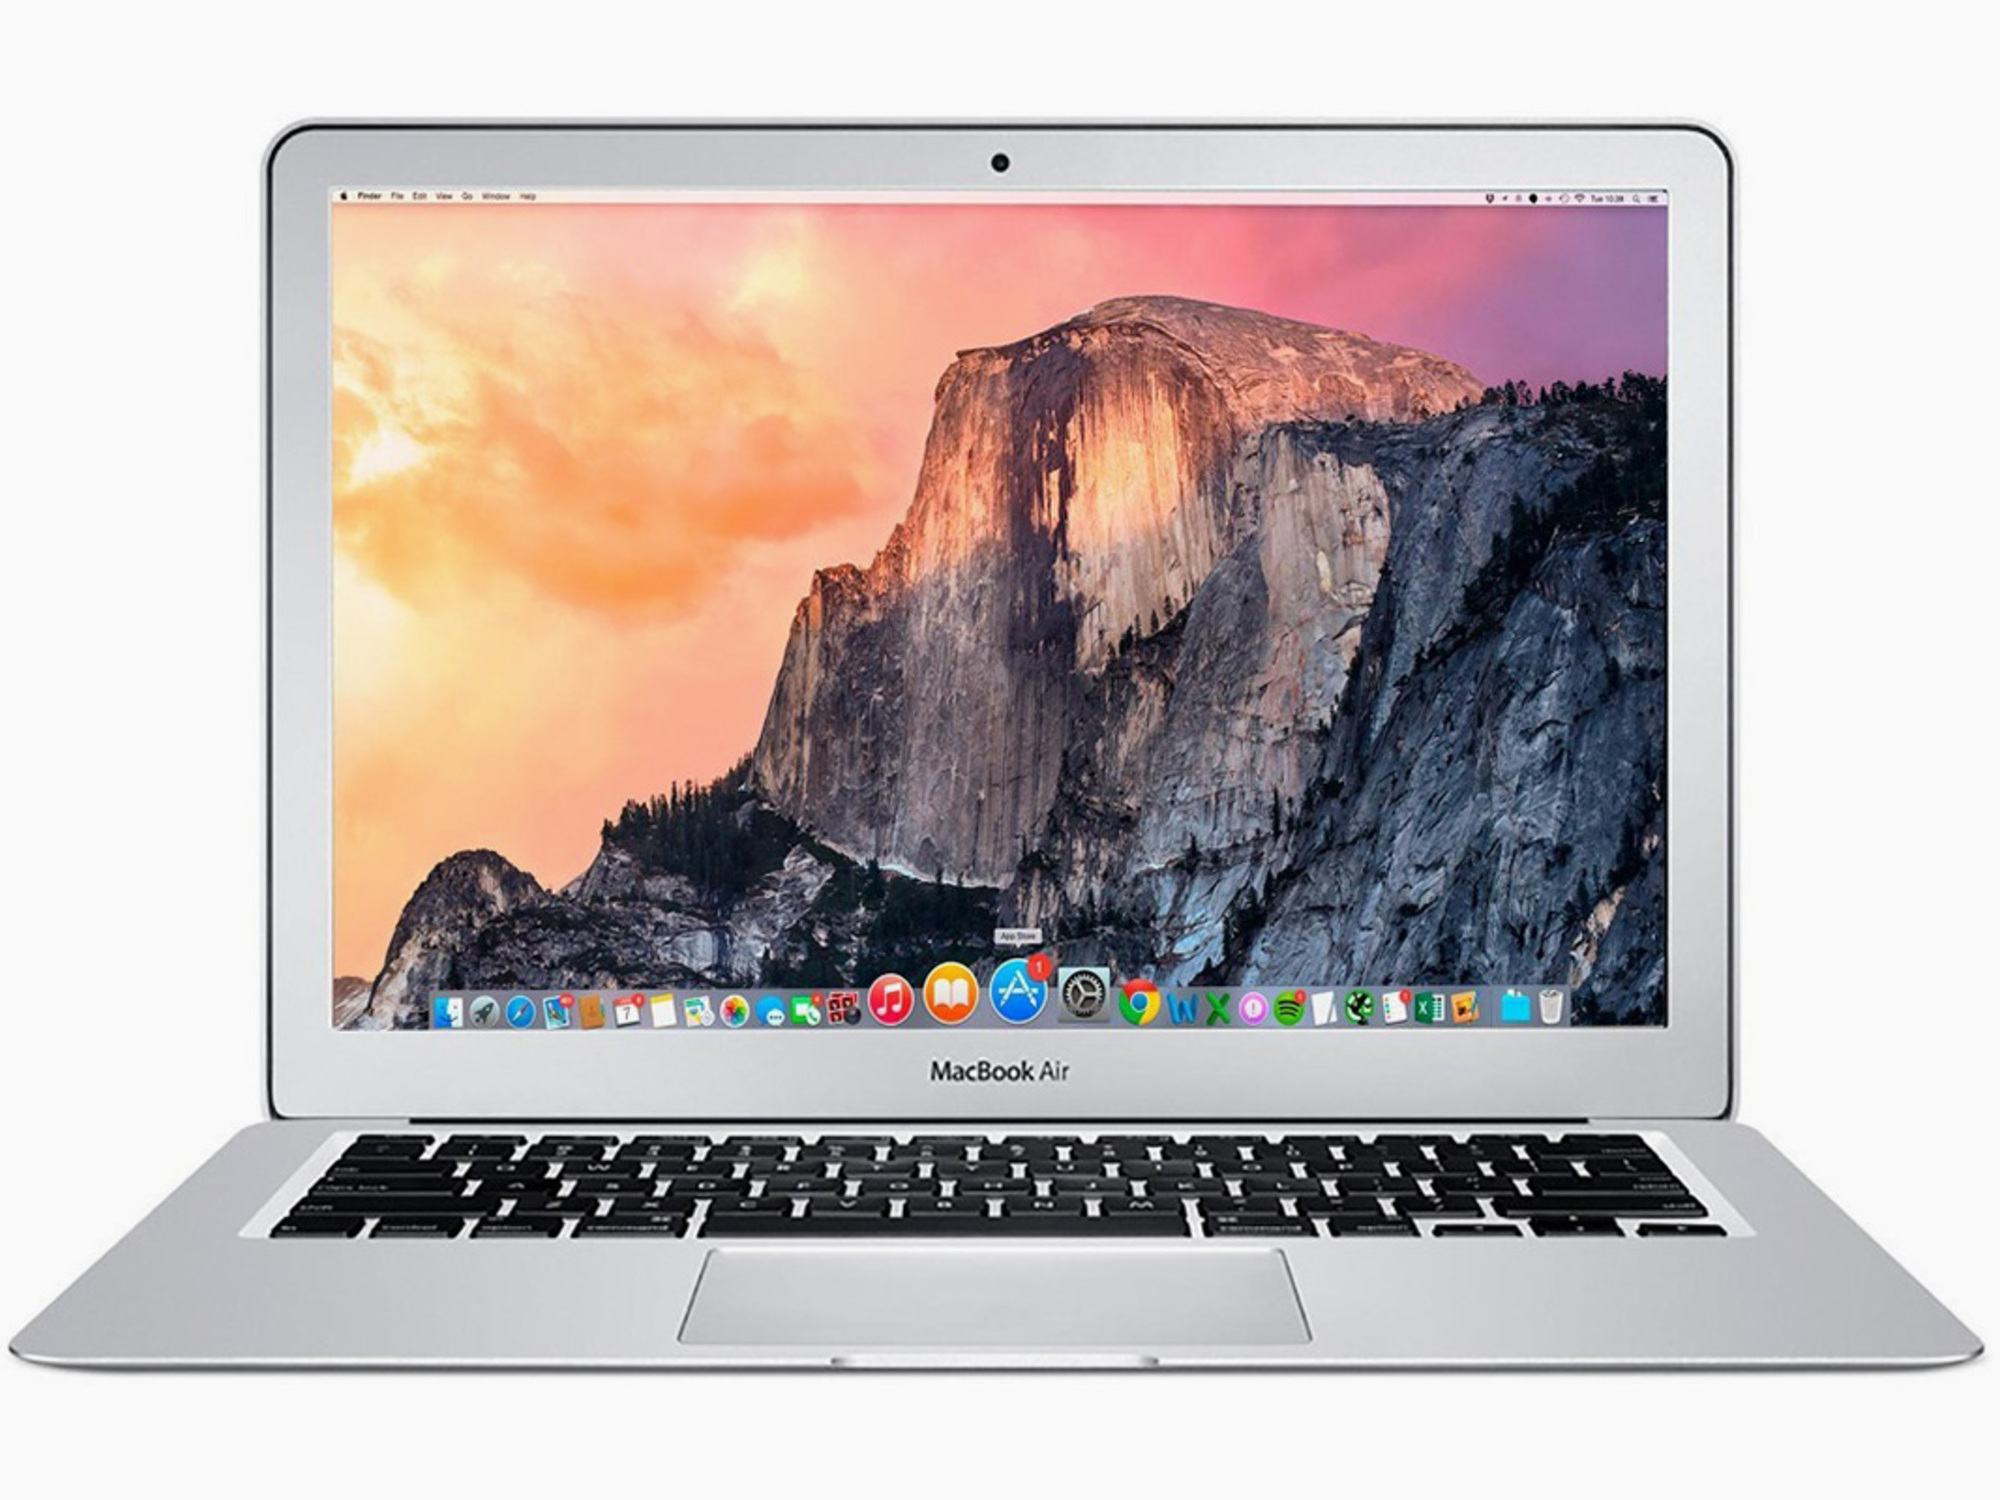 Get this refurbished MacBook Air for a 61 percent discount